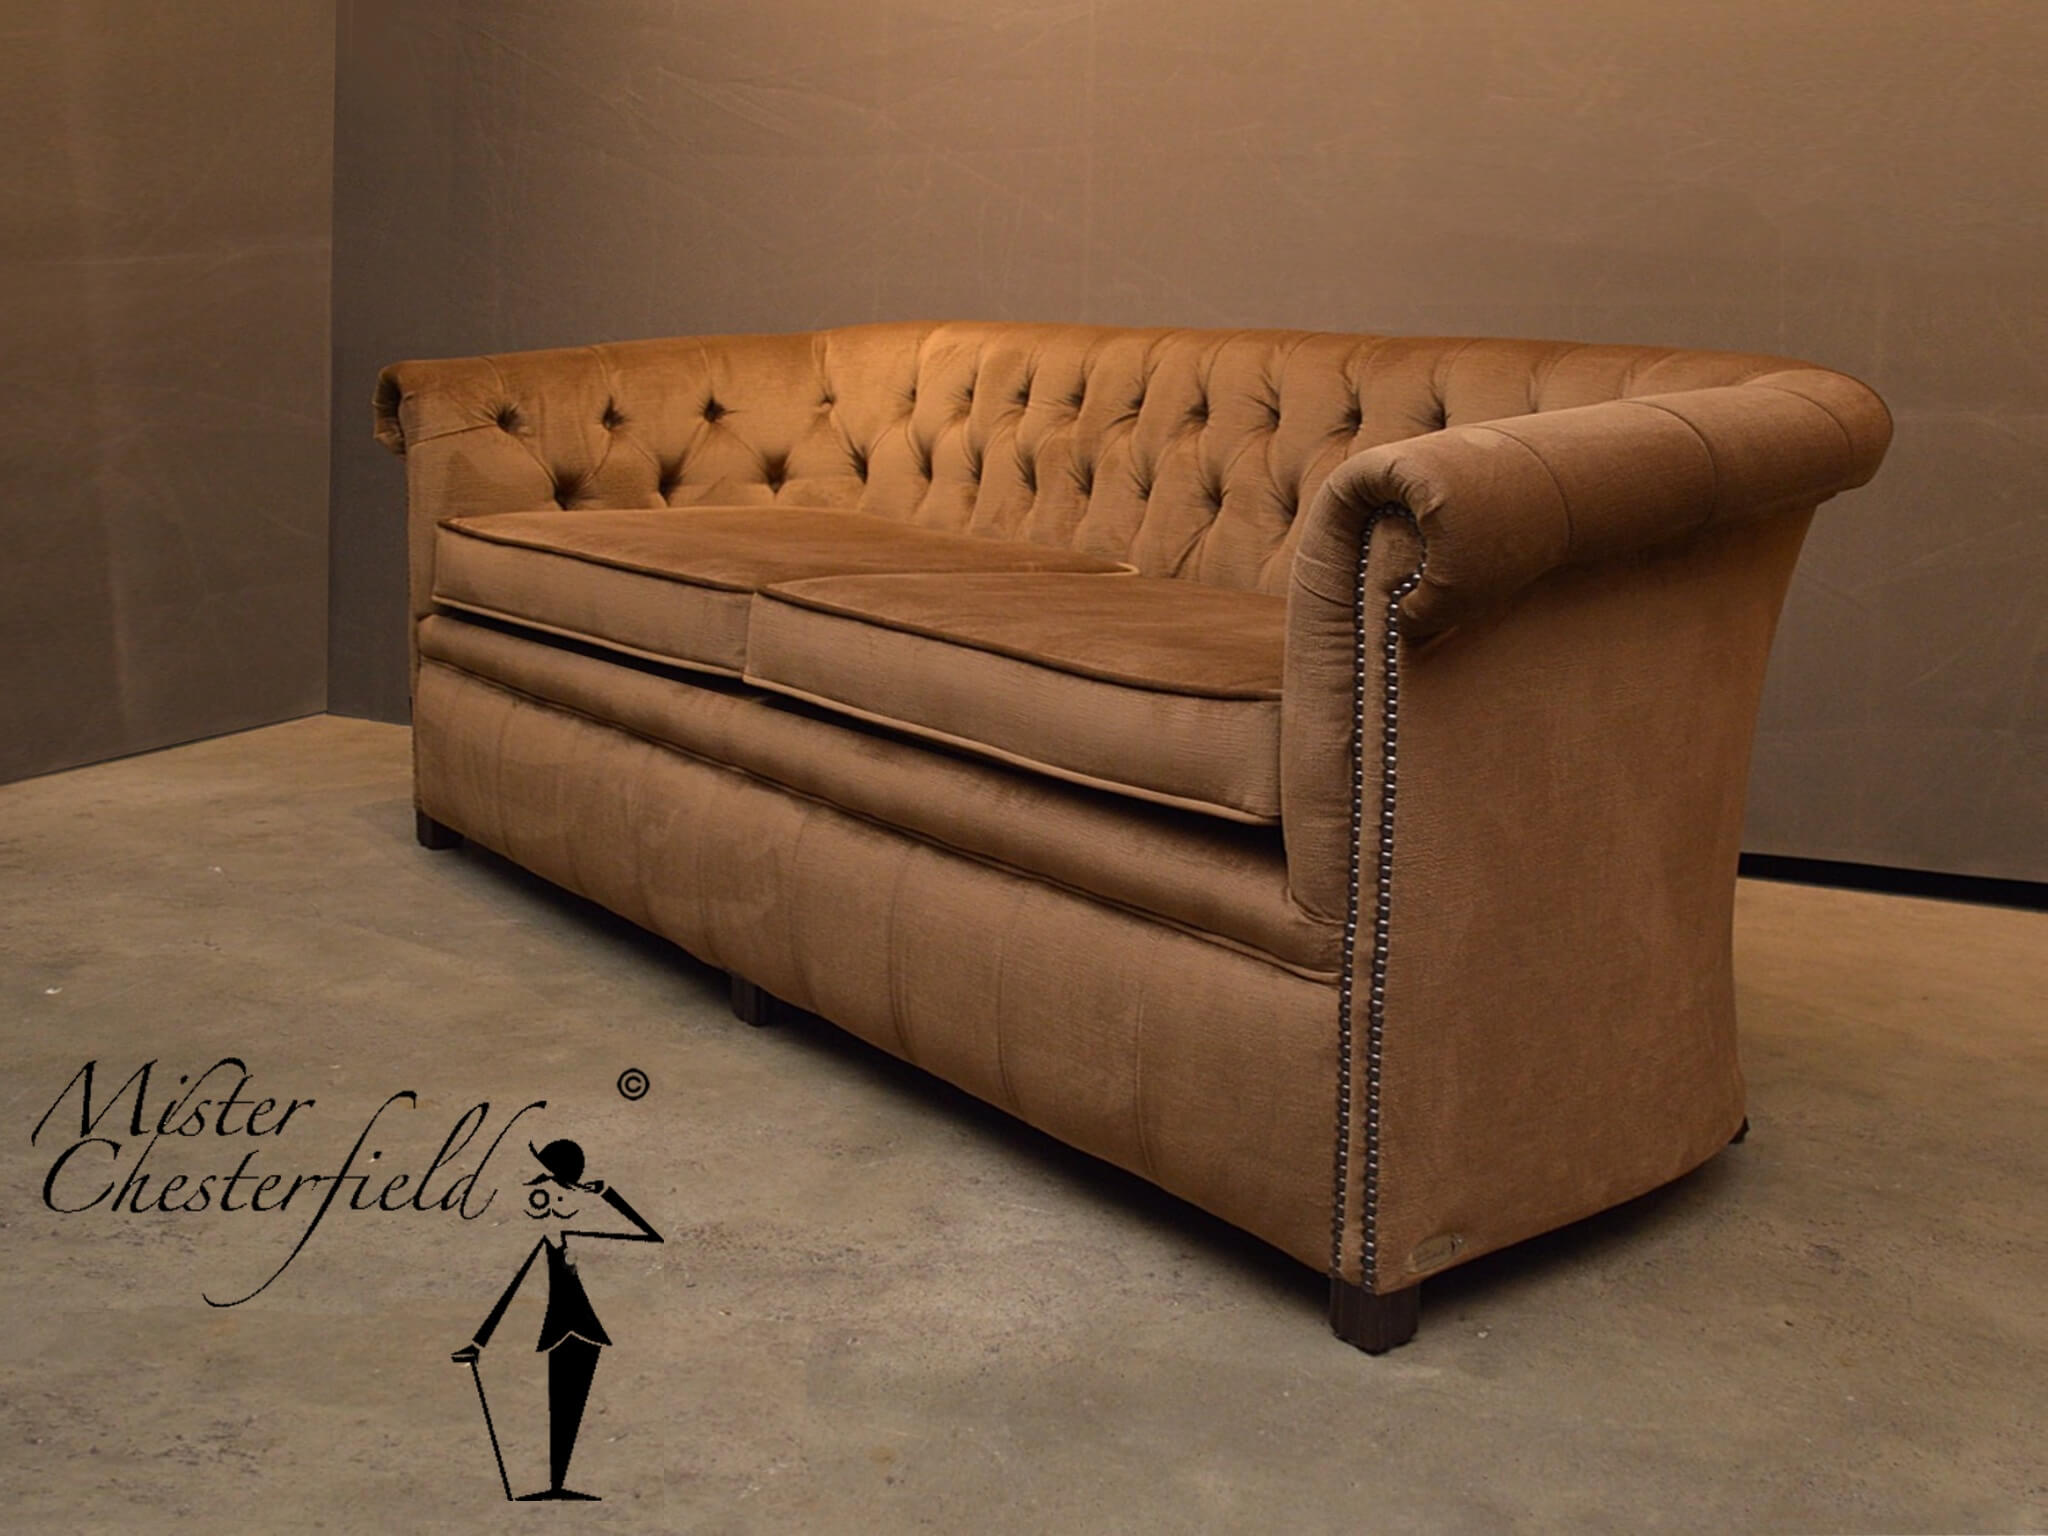 andrew-chesterfield-velours-beige-taupe